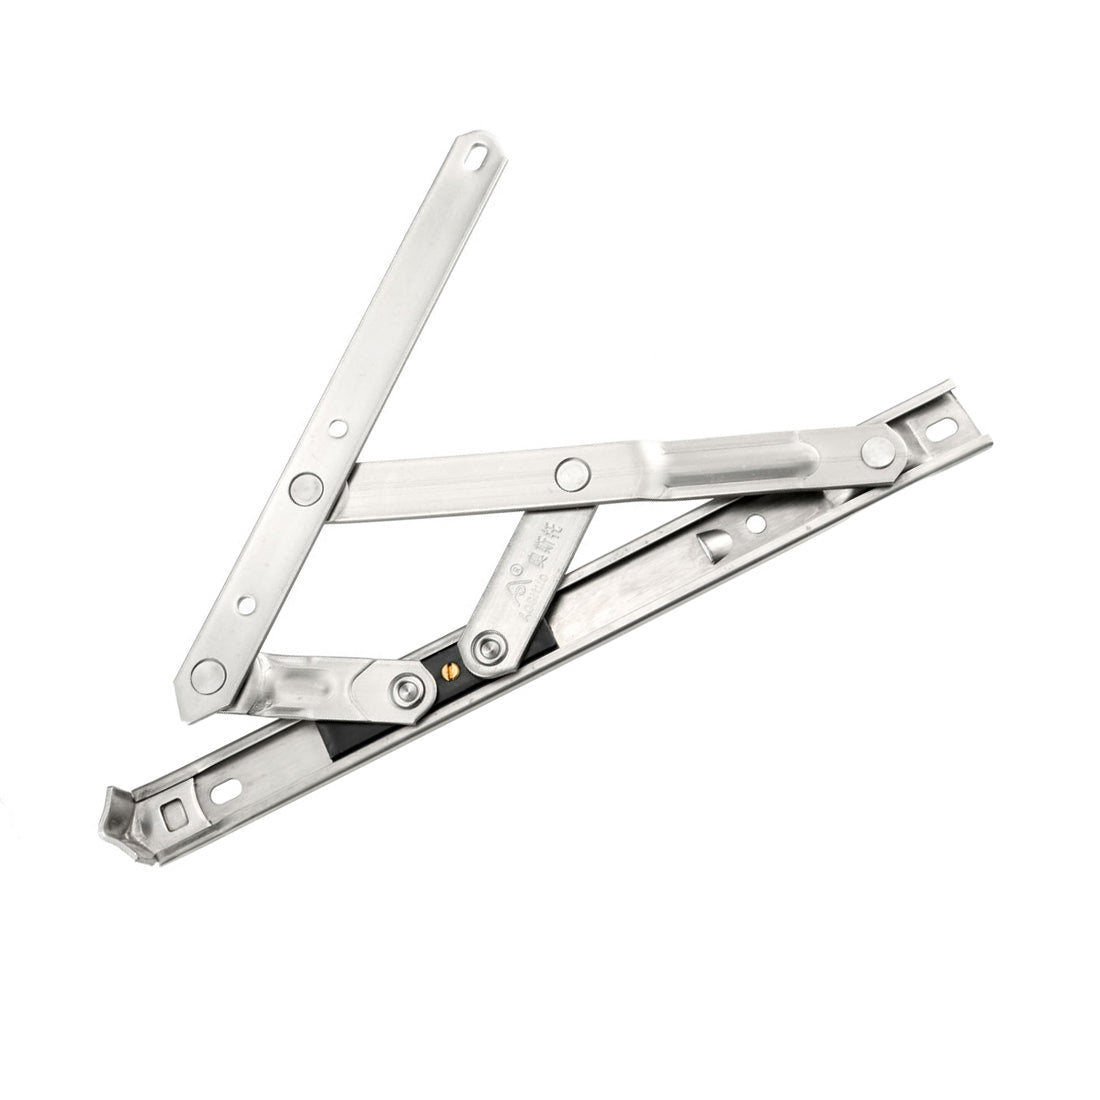 uxcell Uxcell 10-Inch Hanging/Casement Window Hinge, 202 Stainless Steel